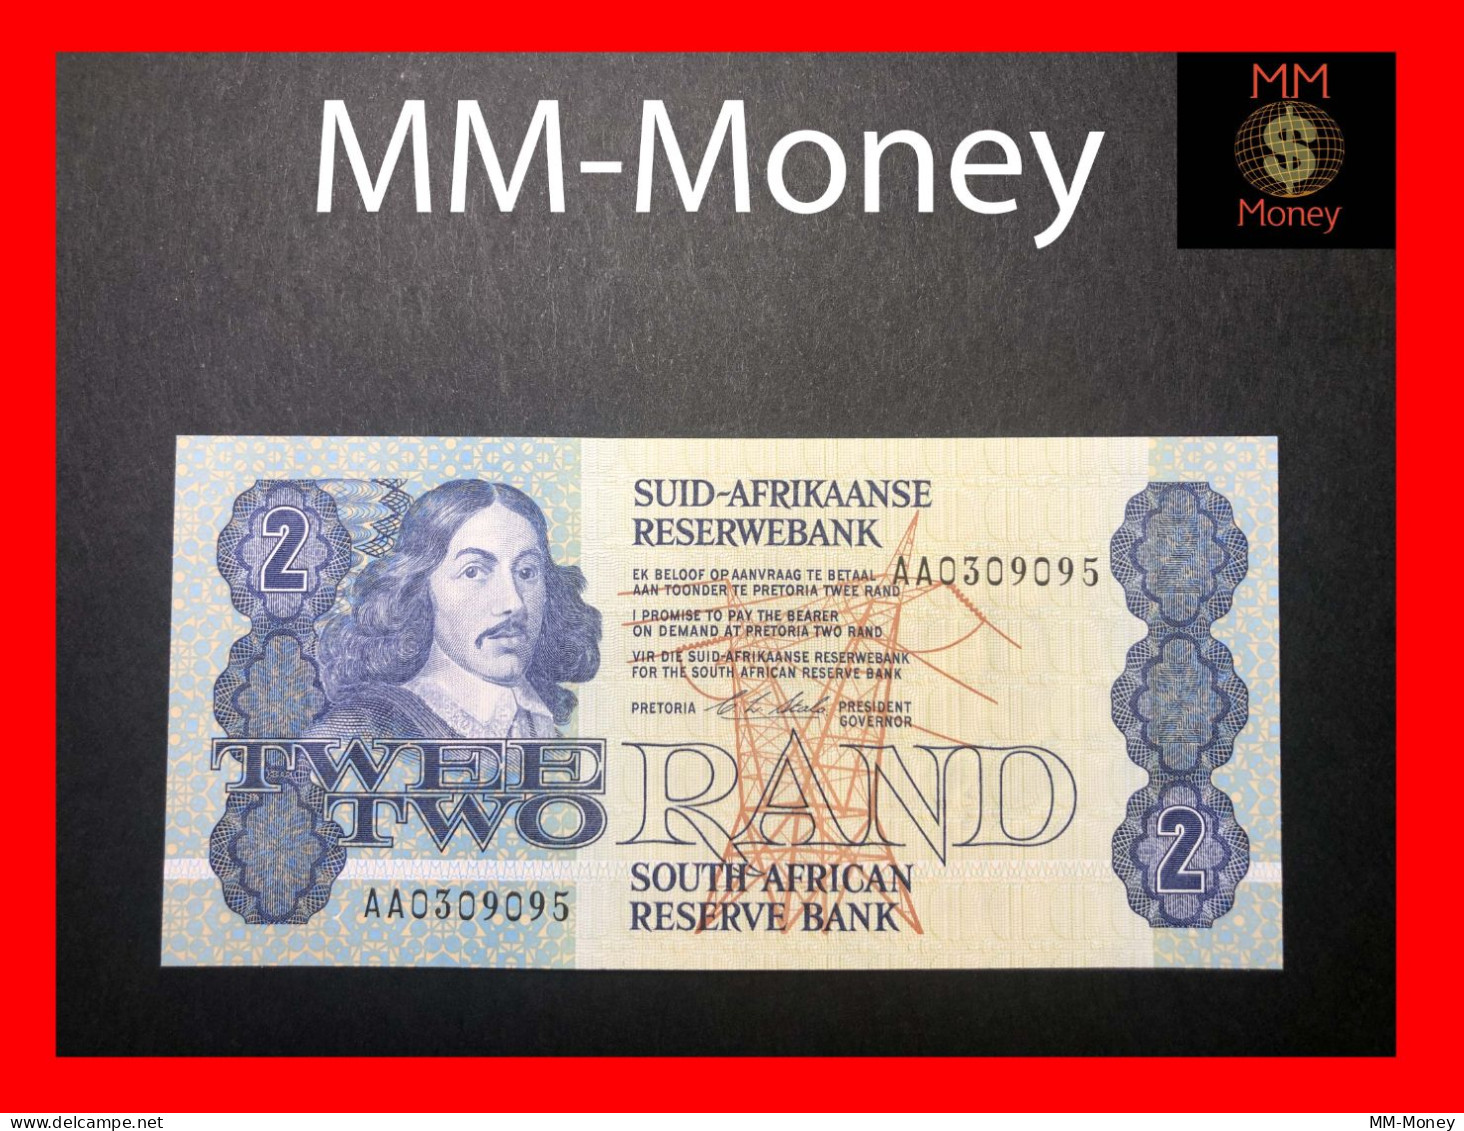 SOUTH AFRICA  2 Rand  1990  P. 118   "sig. Stals"  *alphanumerical Numbering System*  **serial AA**   UNC - South Africa